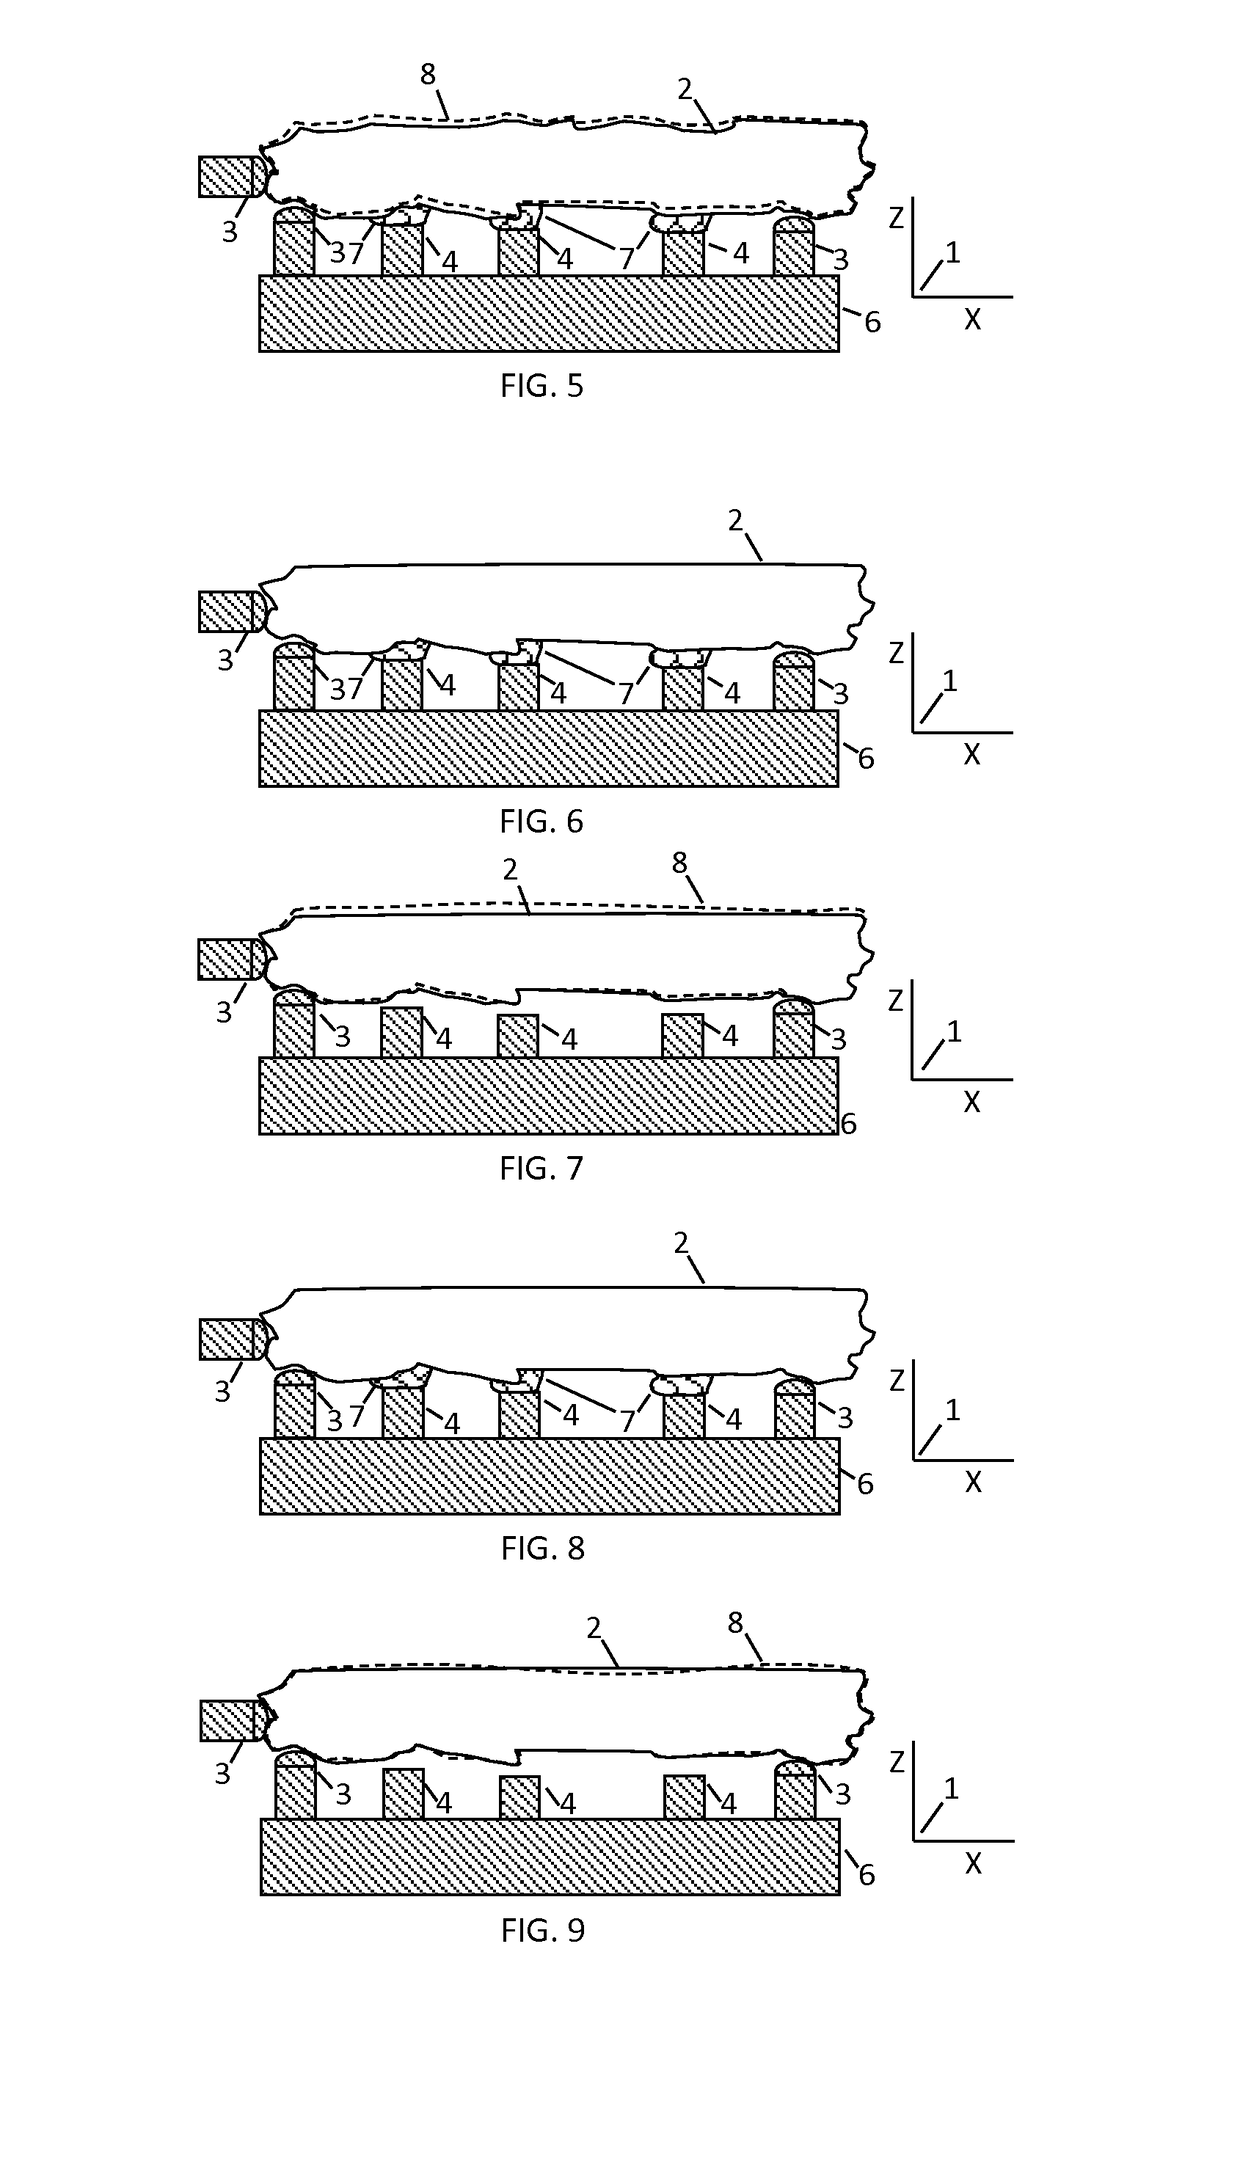 Method and devices to minimize work-piece distortion due to adhering stresses and changes in internal stresses